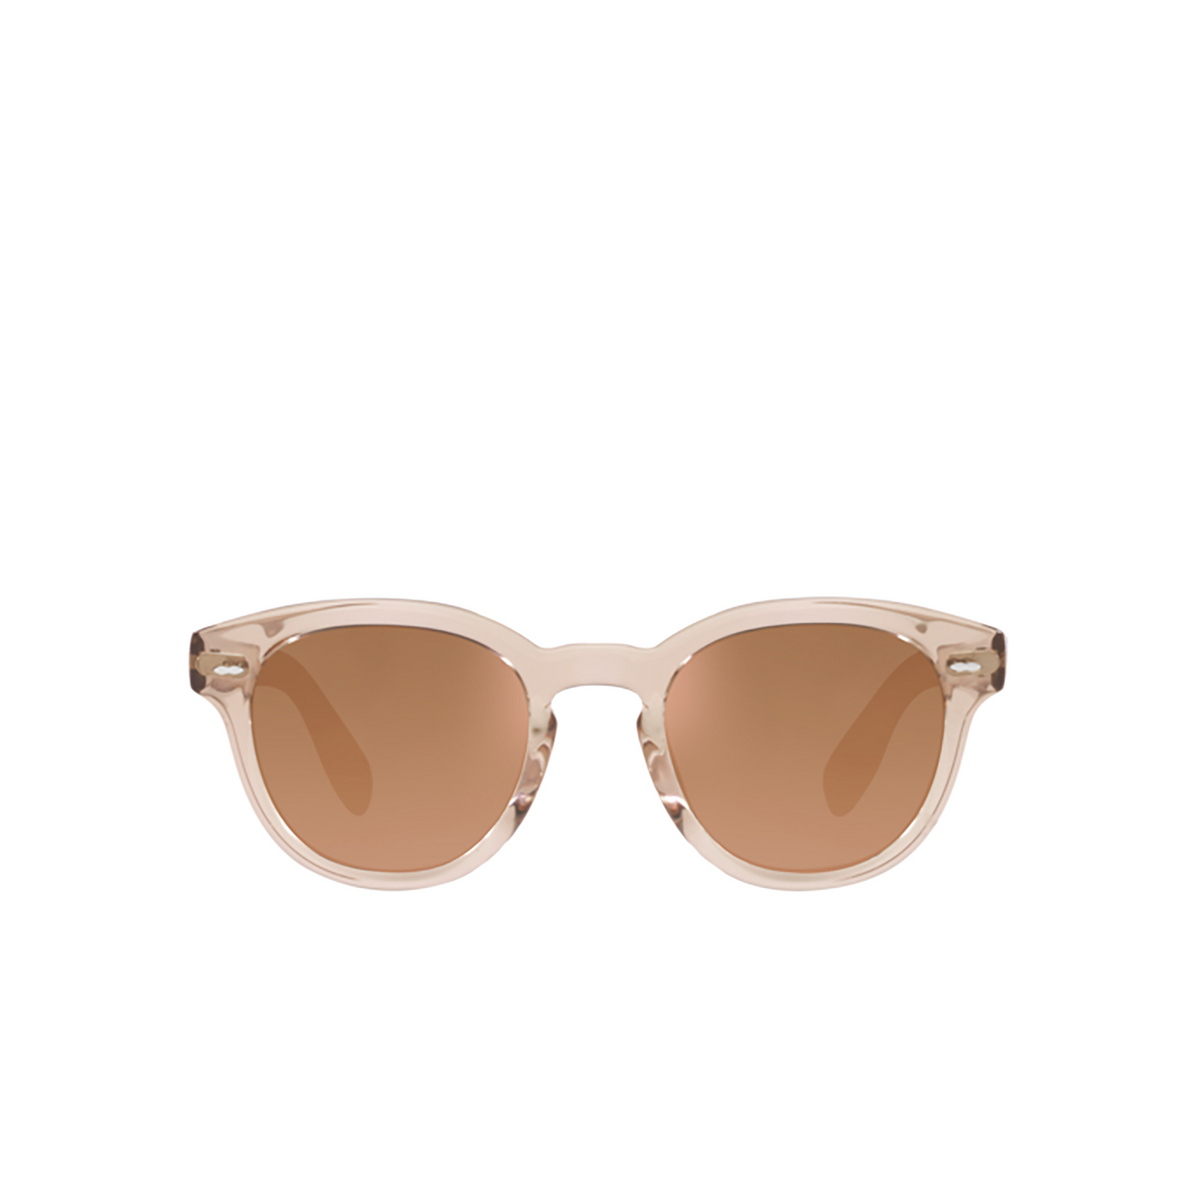 Occhiali da sole Oliver Peoples CARY GRANT 147142 Blush - frontale